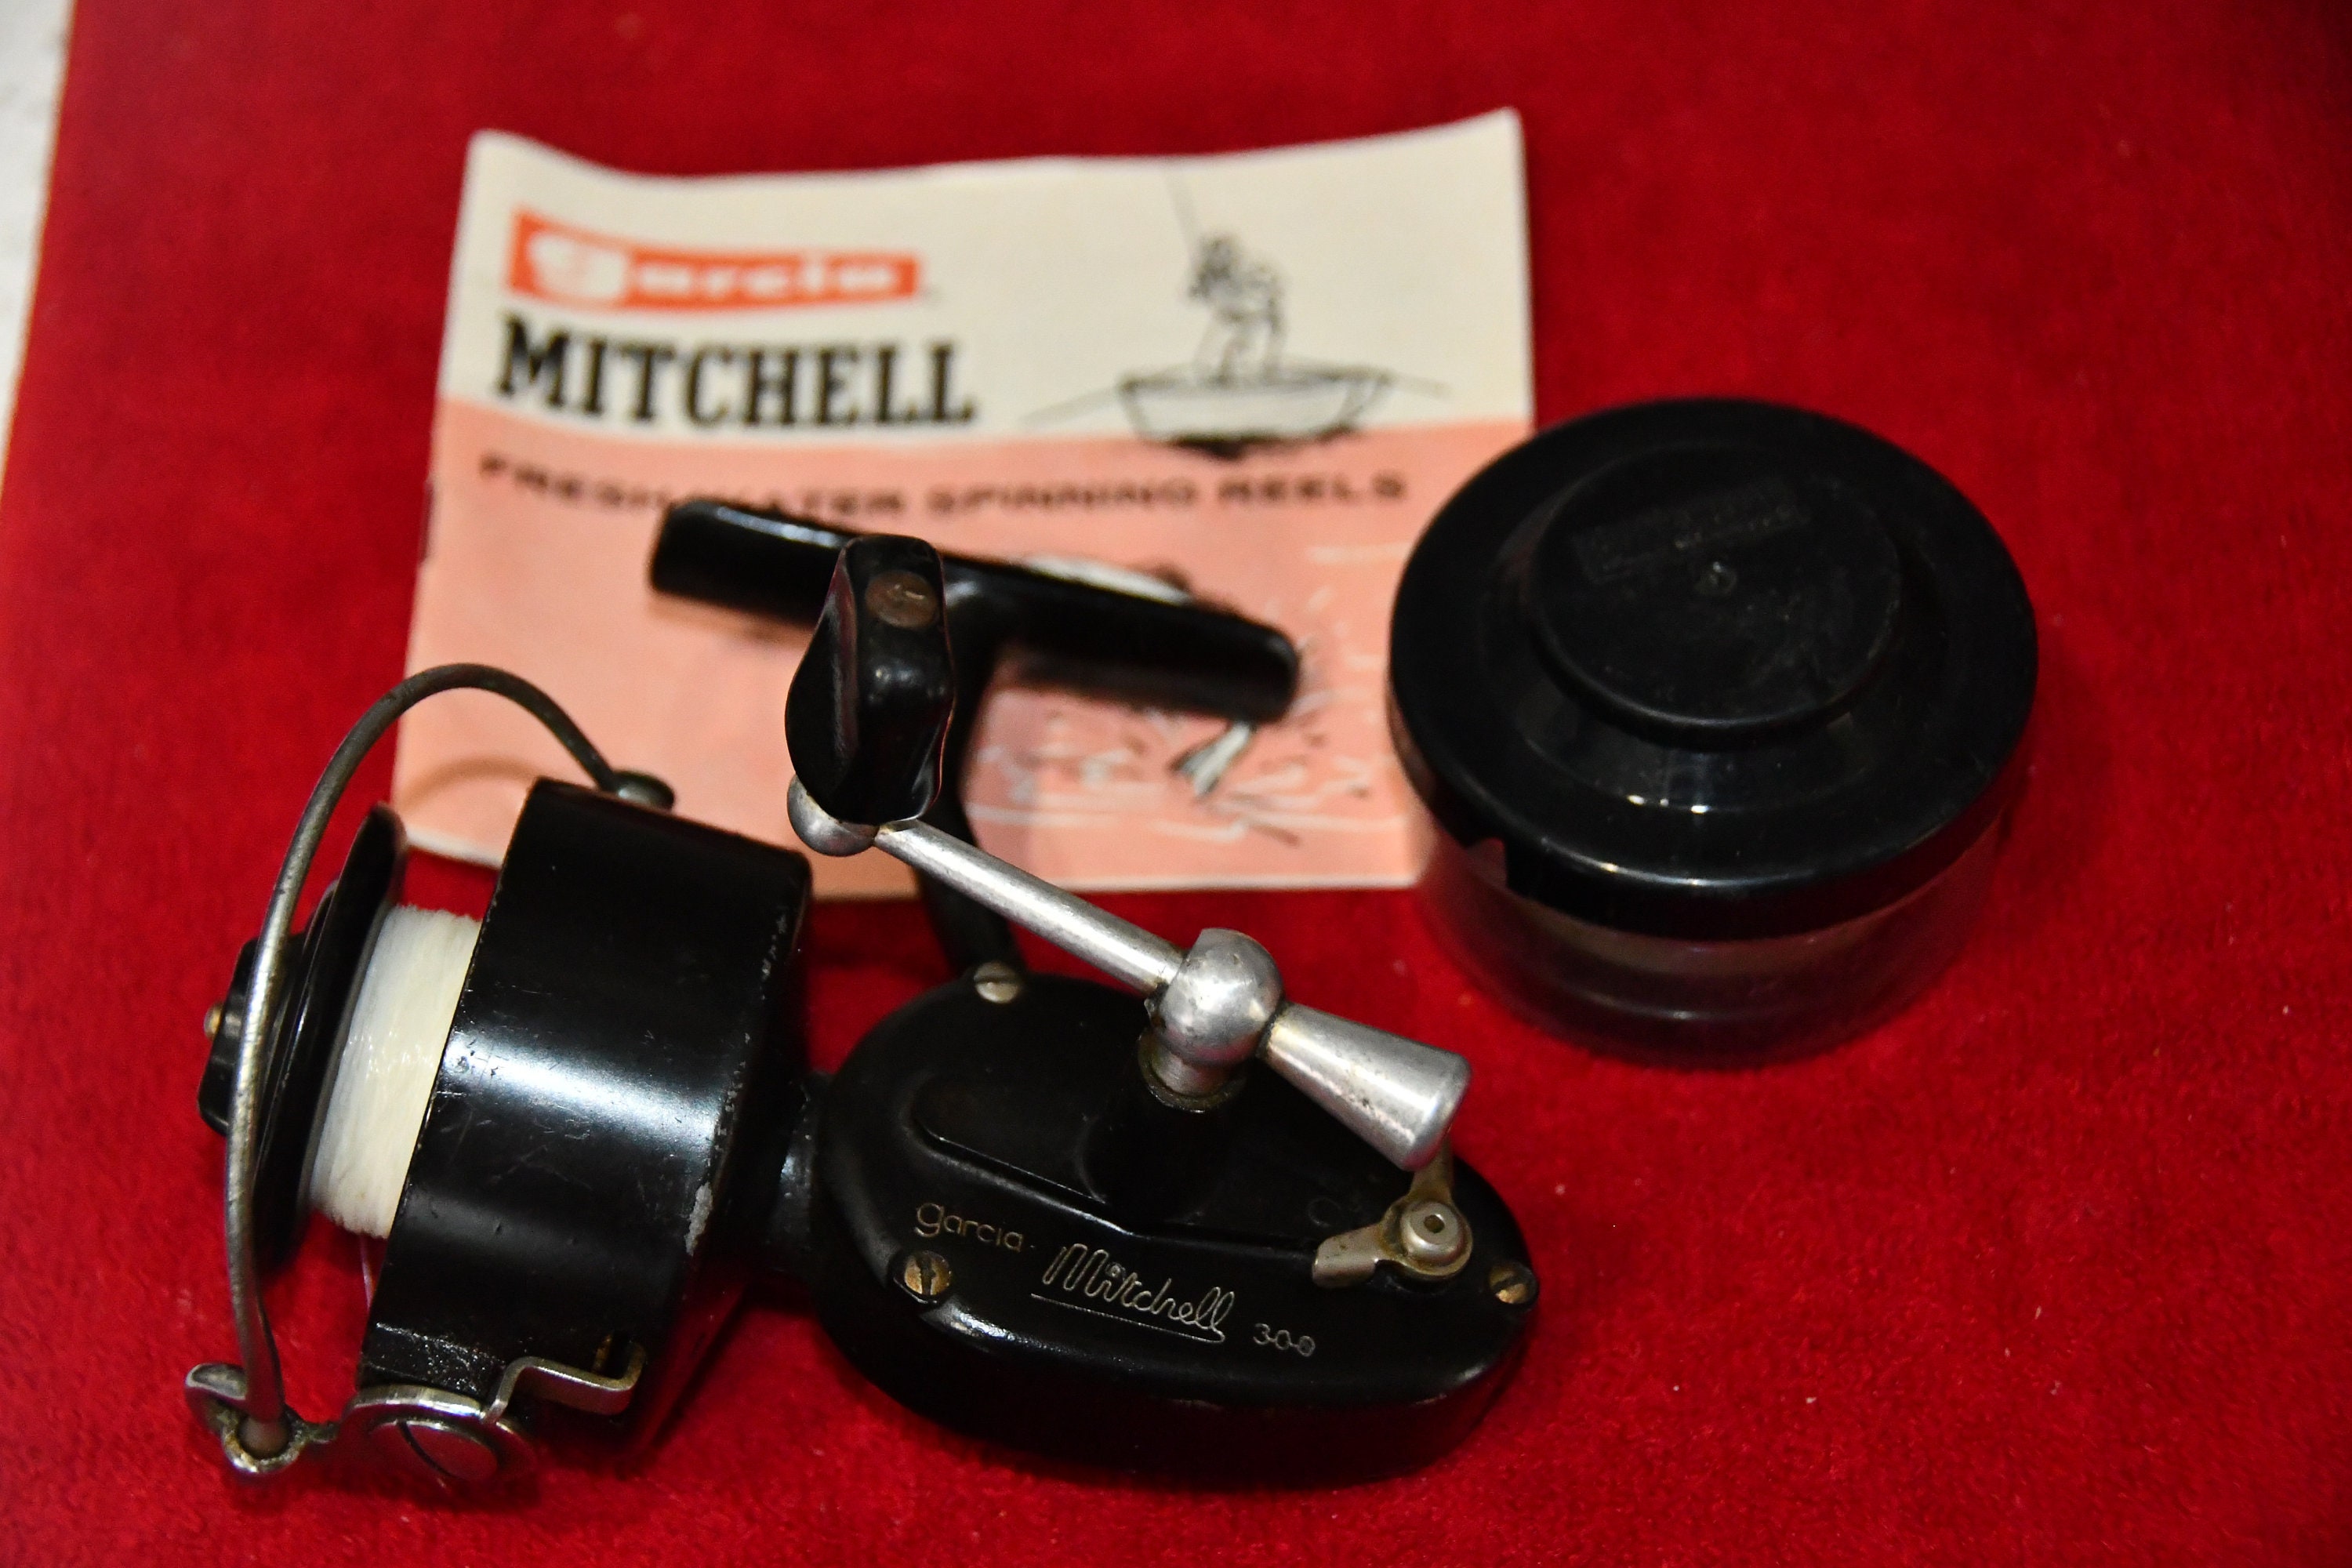 BOXED GARCIA MITCHELL 300 FIXED SPOOL FISHING REEL + SPARE SPOOL